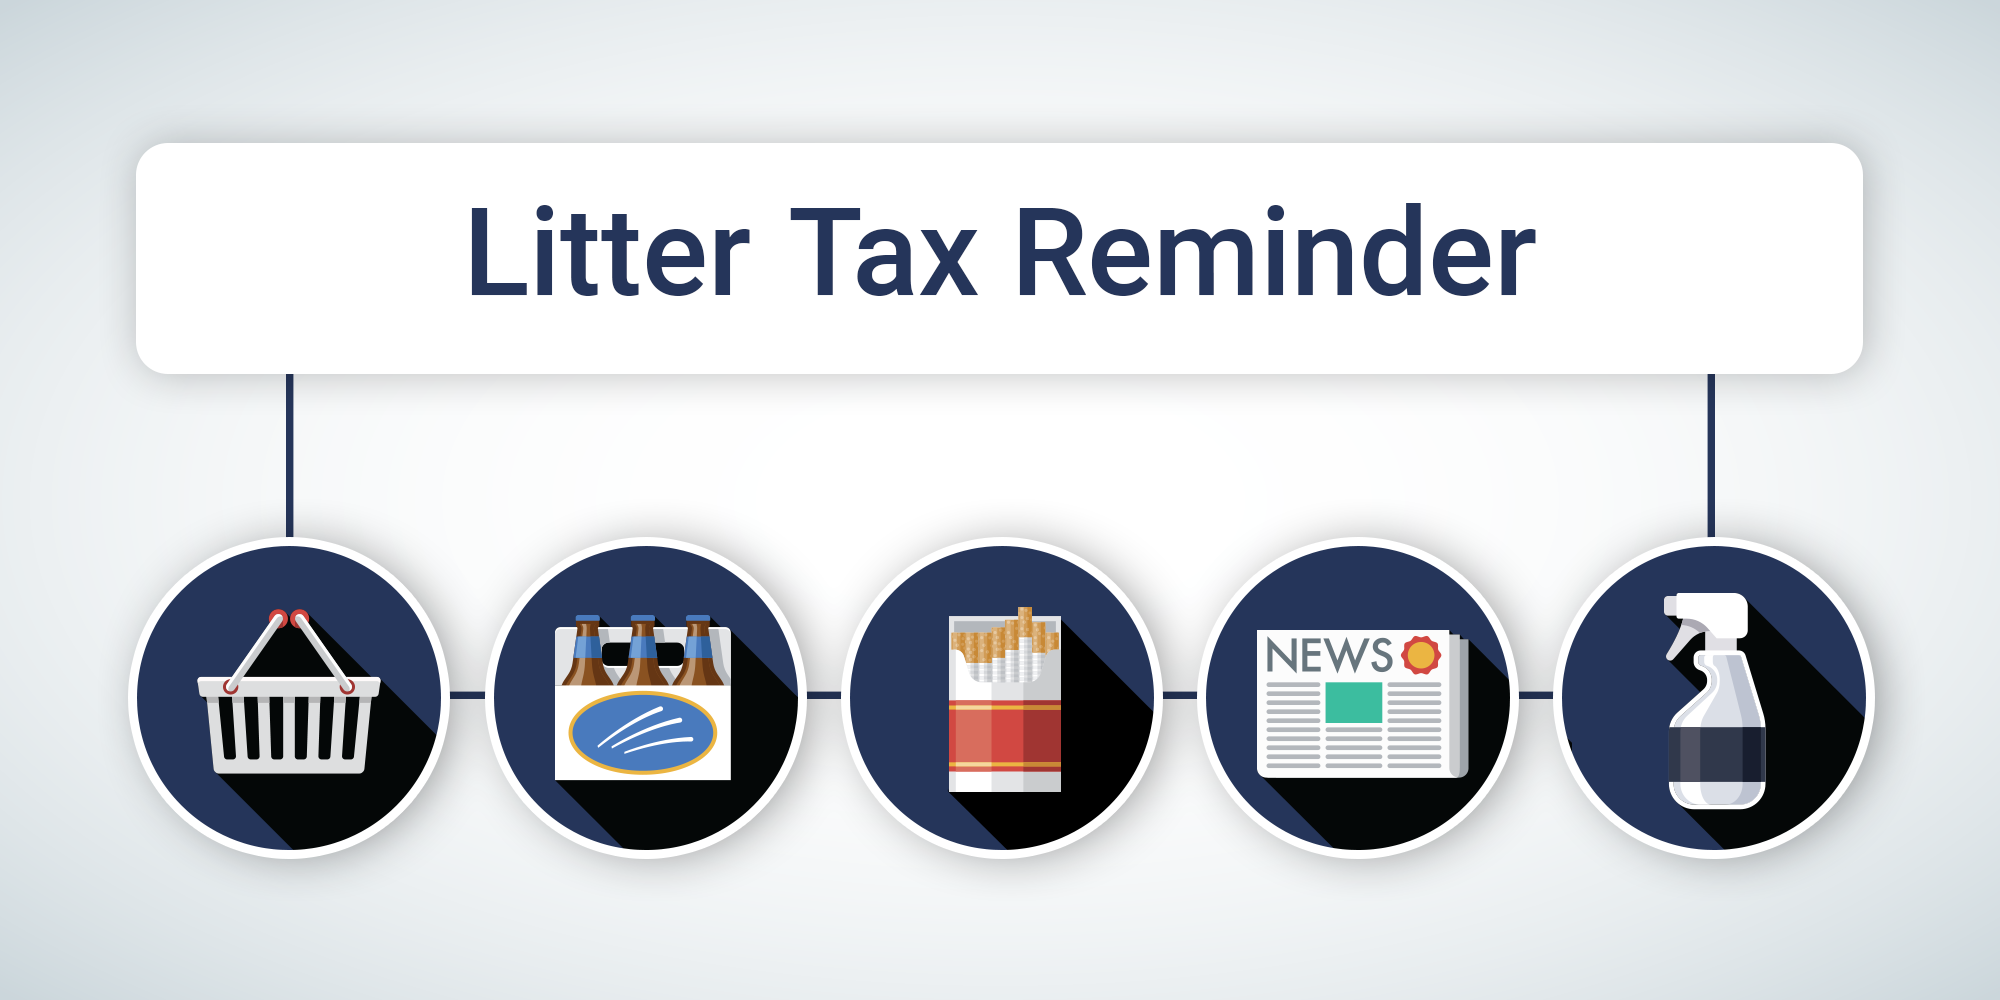 Text reading "Litter Tax Reminder" and icons of a basket, a six pack of glass bottles, a pack of cigarettes, a newspaper, and a spray bottle.